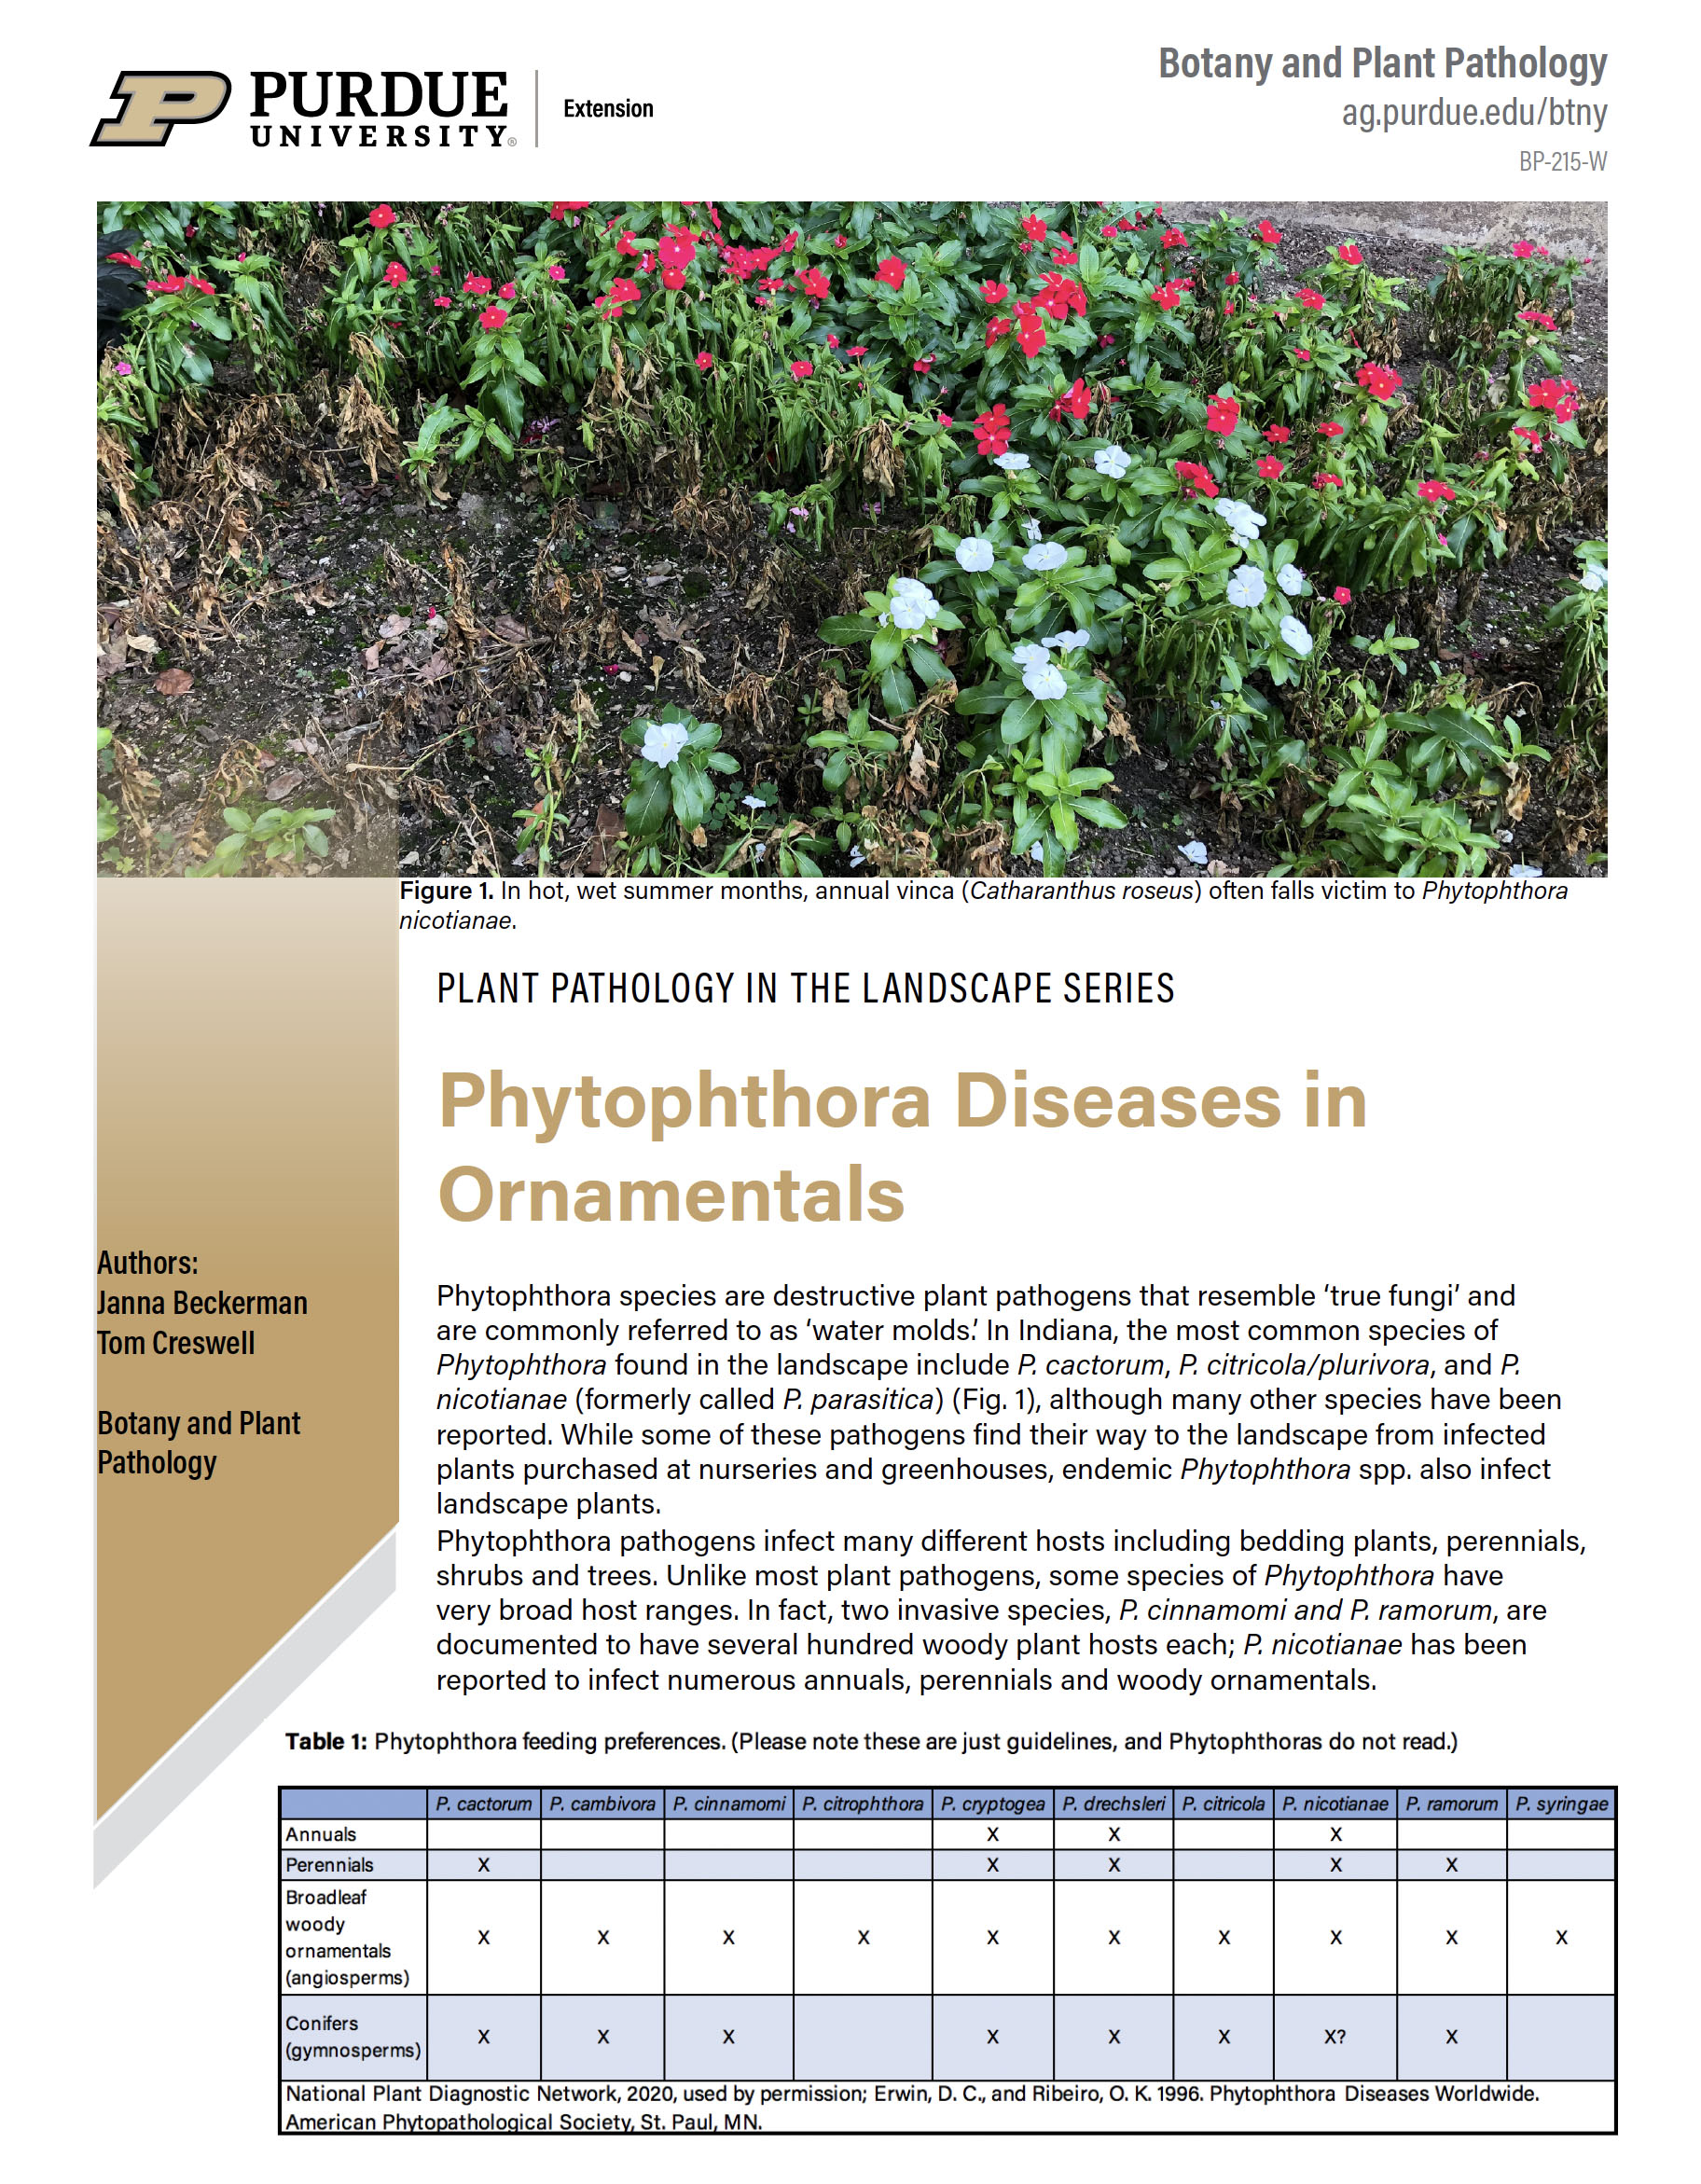 Phytophthora Diseases in Ornamentals